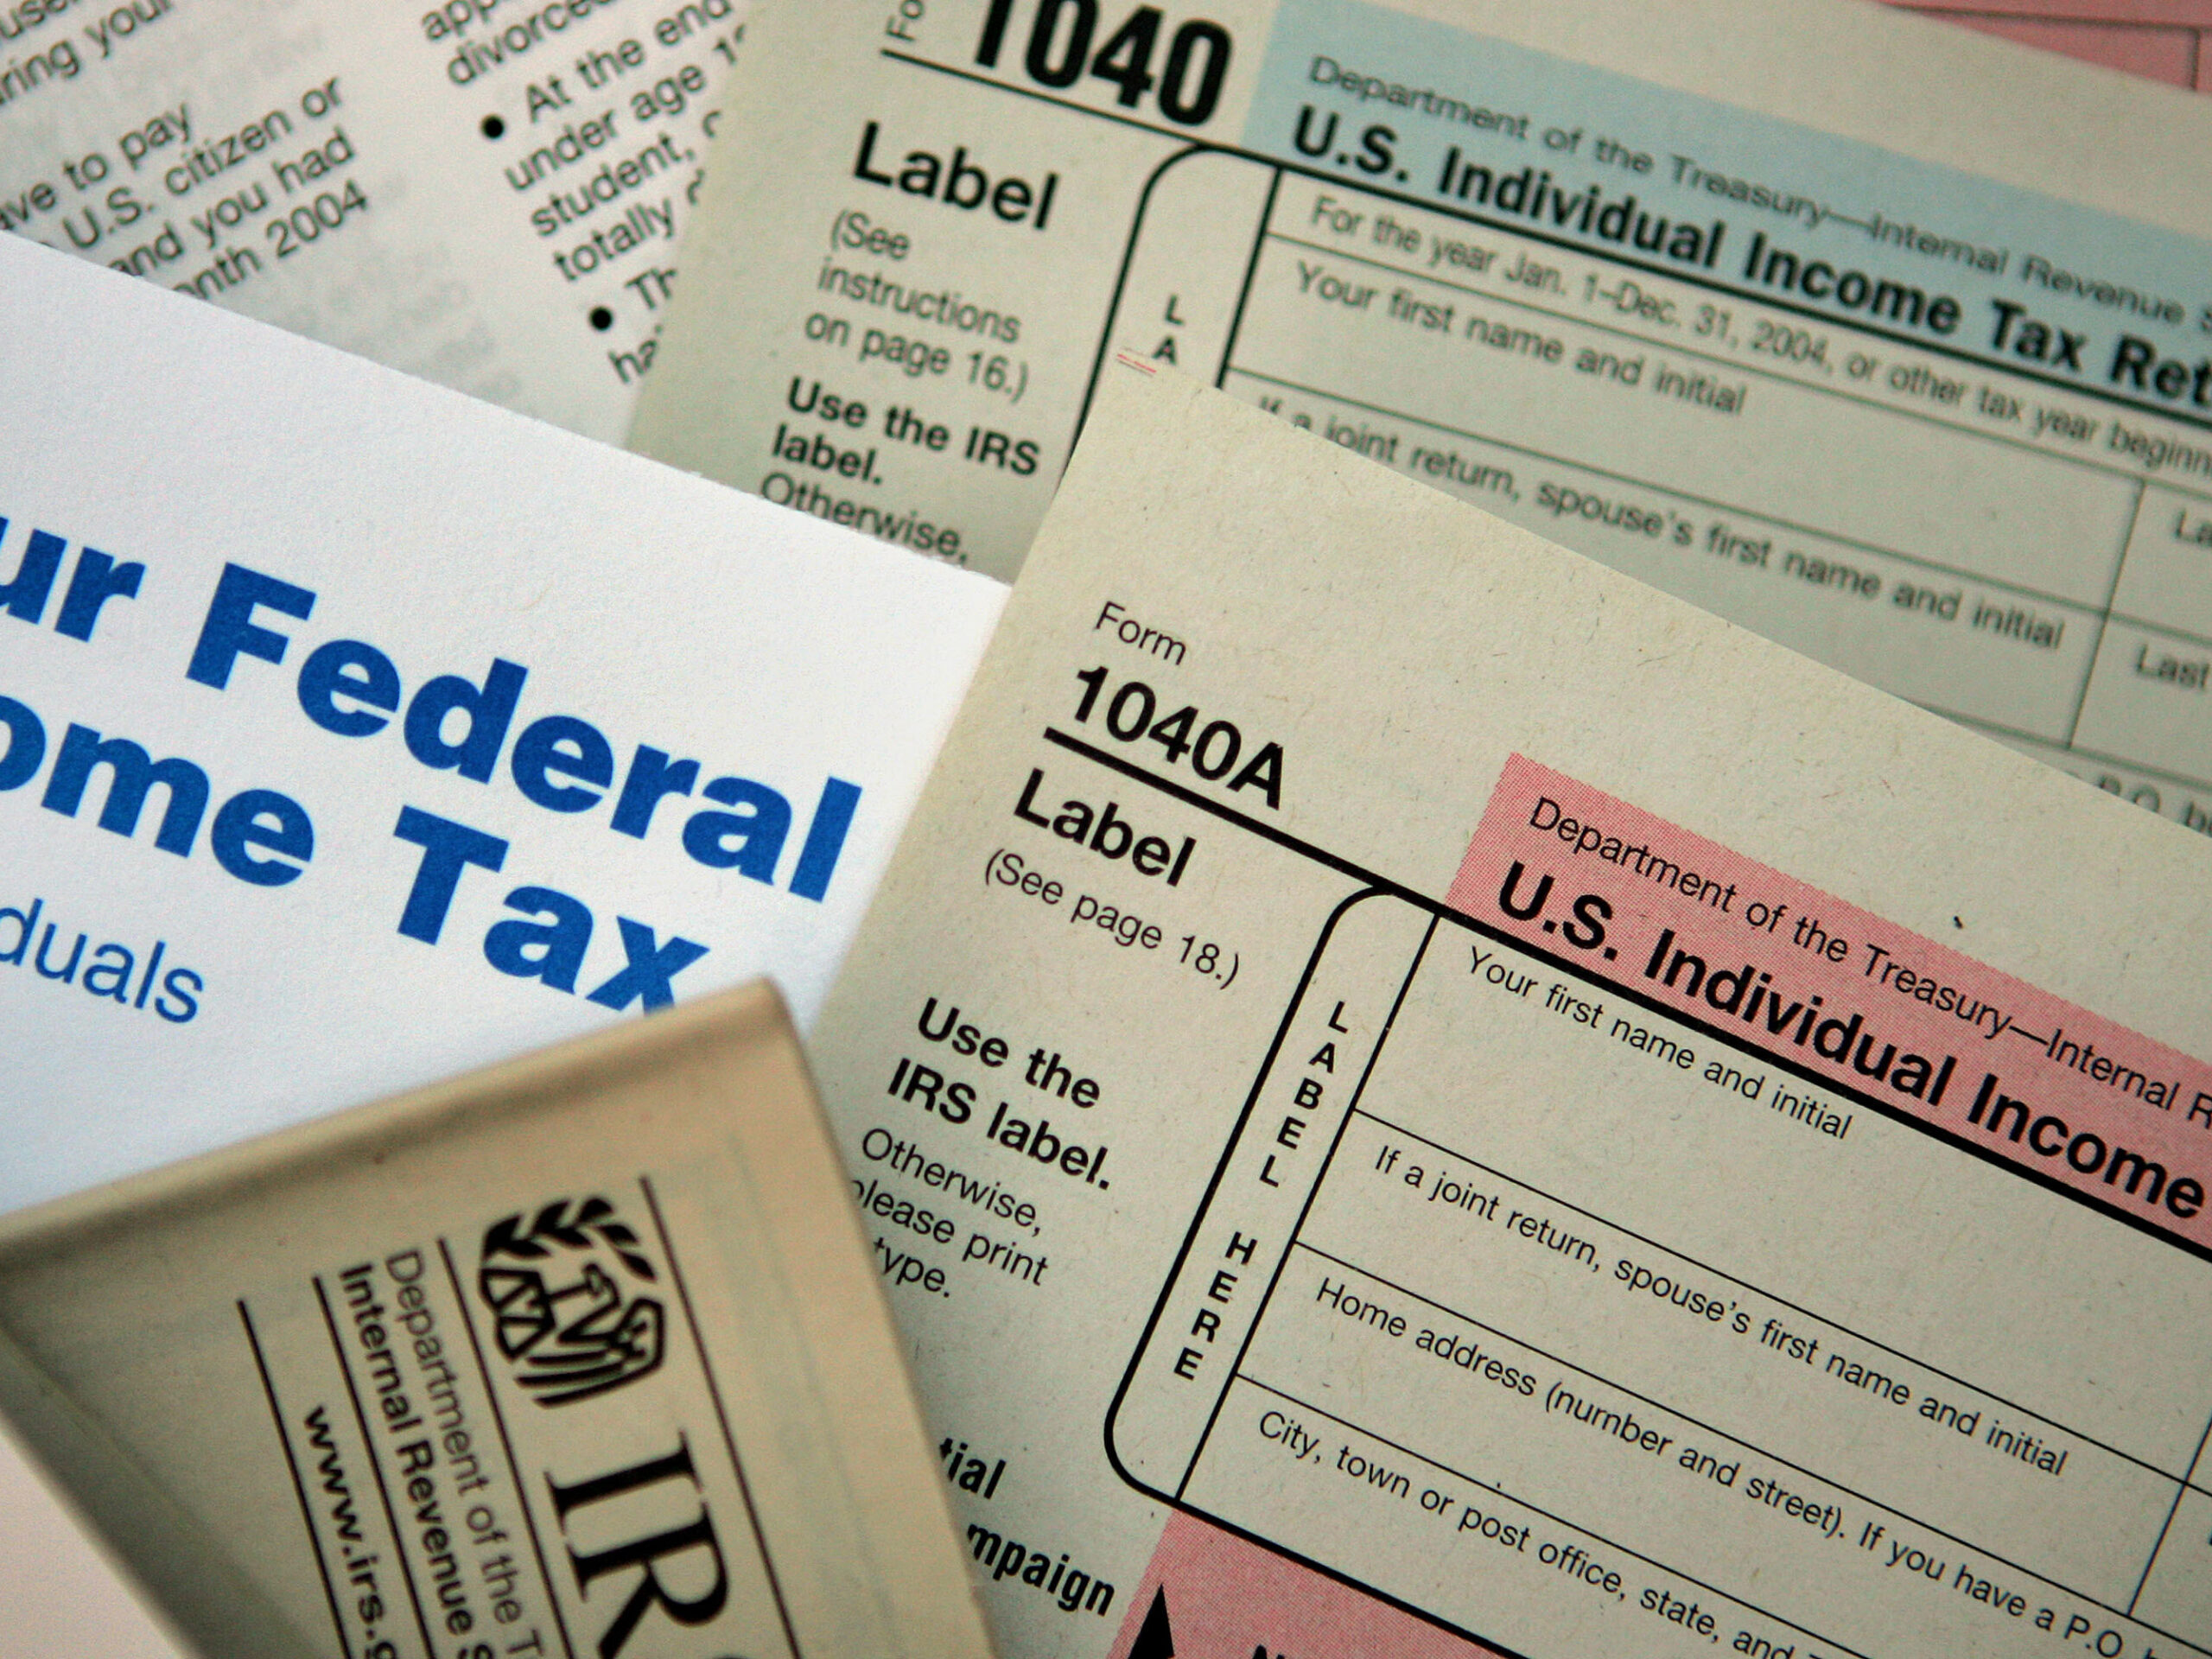 About a third of all taxpayers are expected to file their returns in the last two weeks before the April 15th deadline.